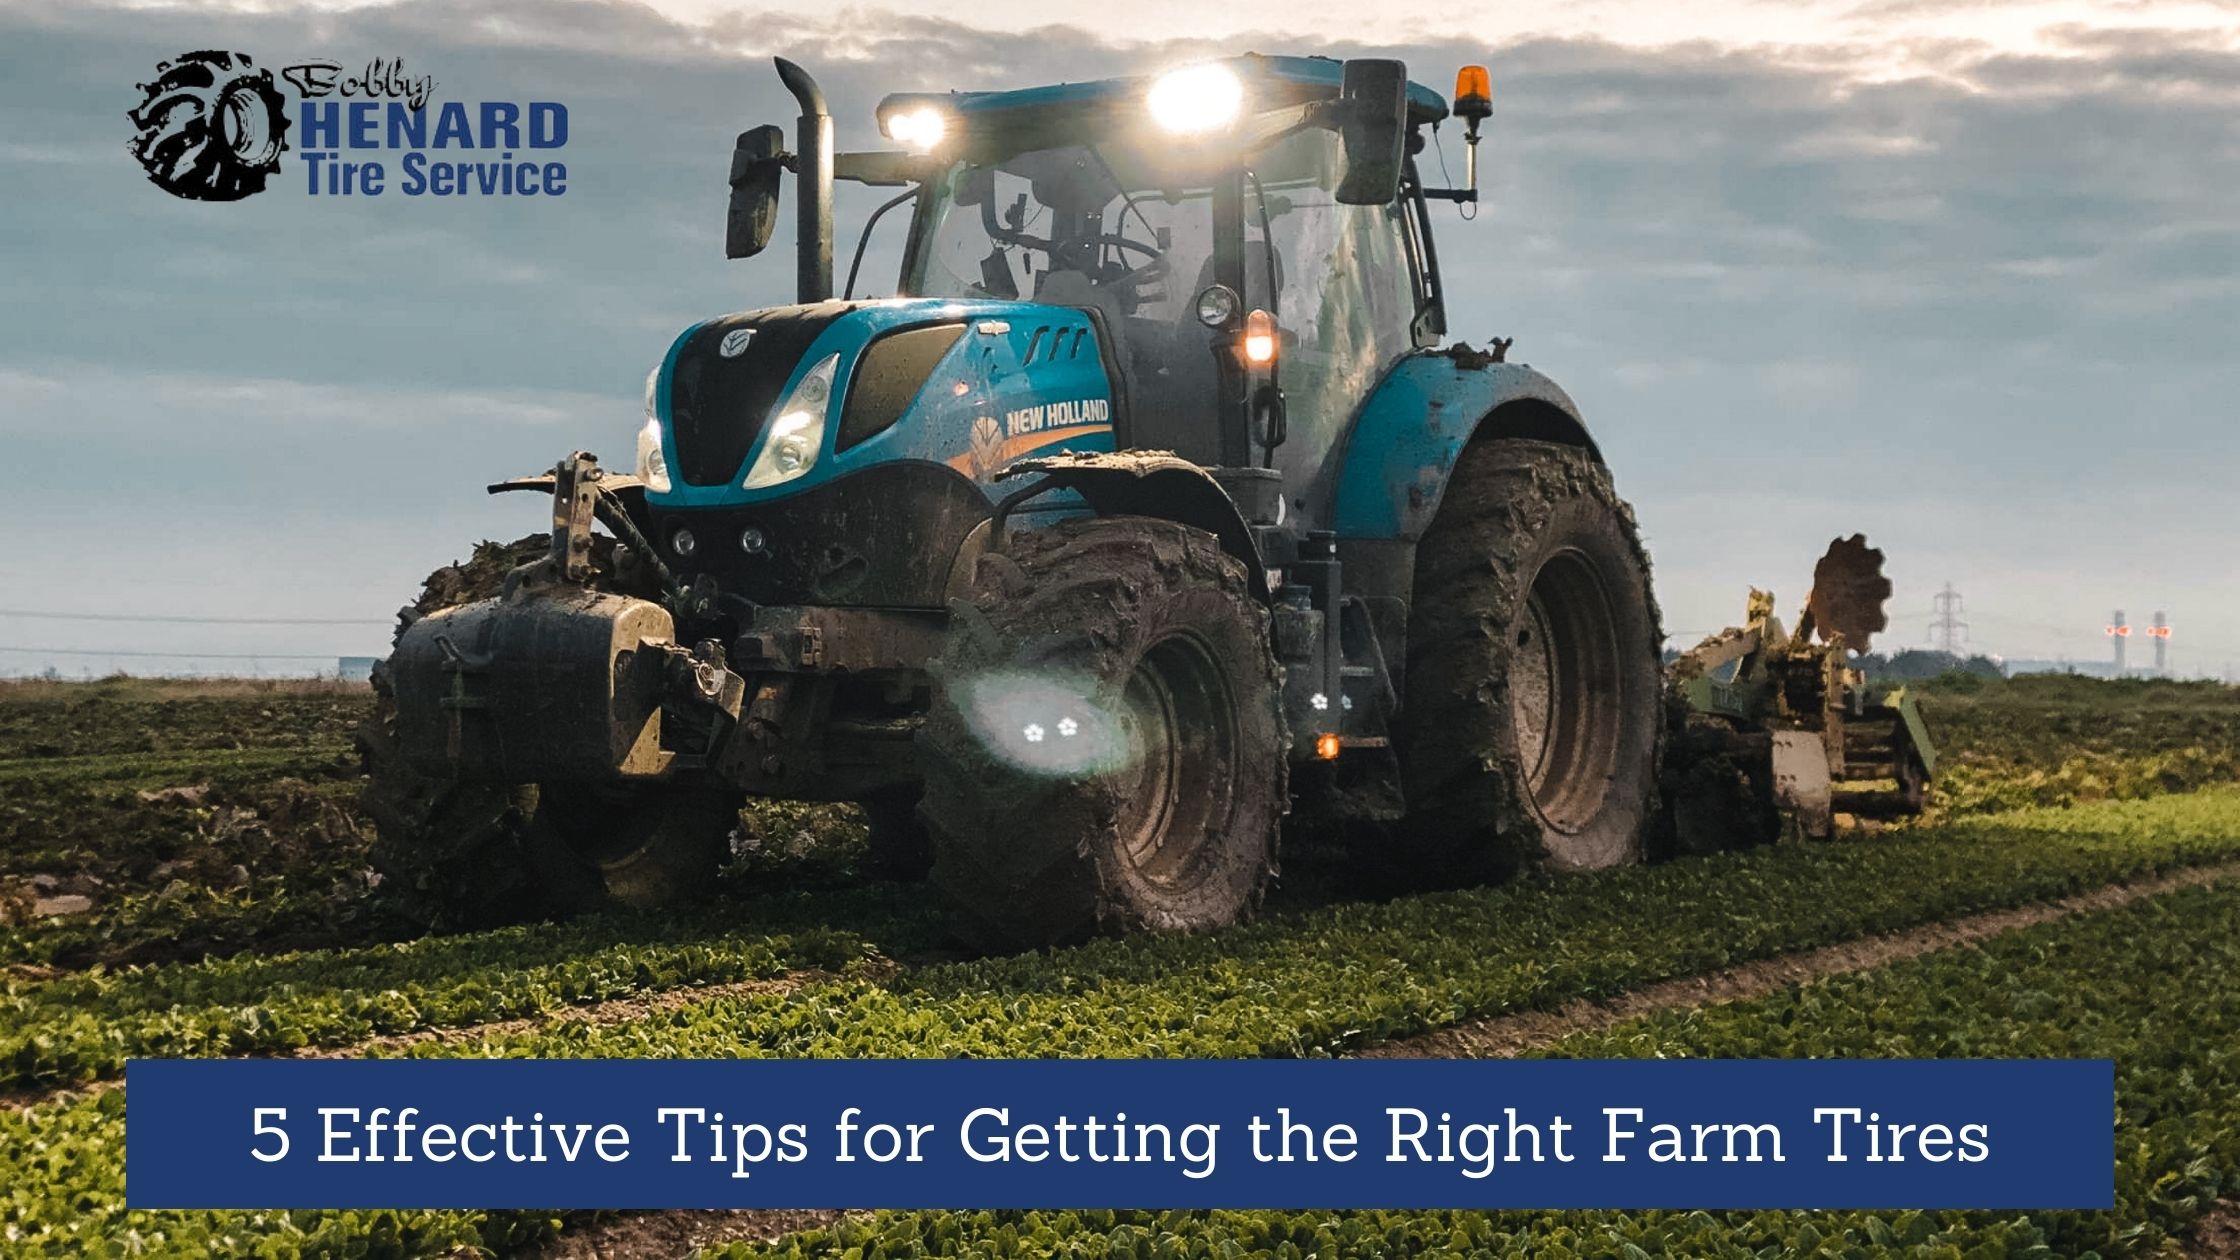 5 Effective Tips for Getting the Right Farm Tires